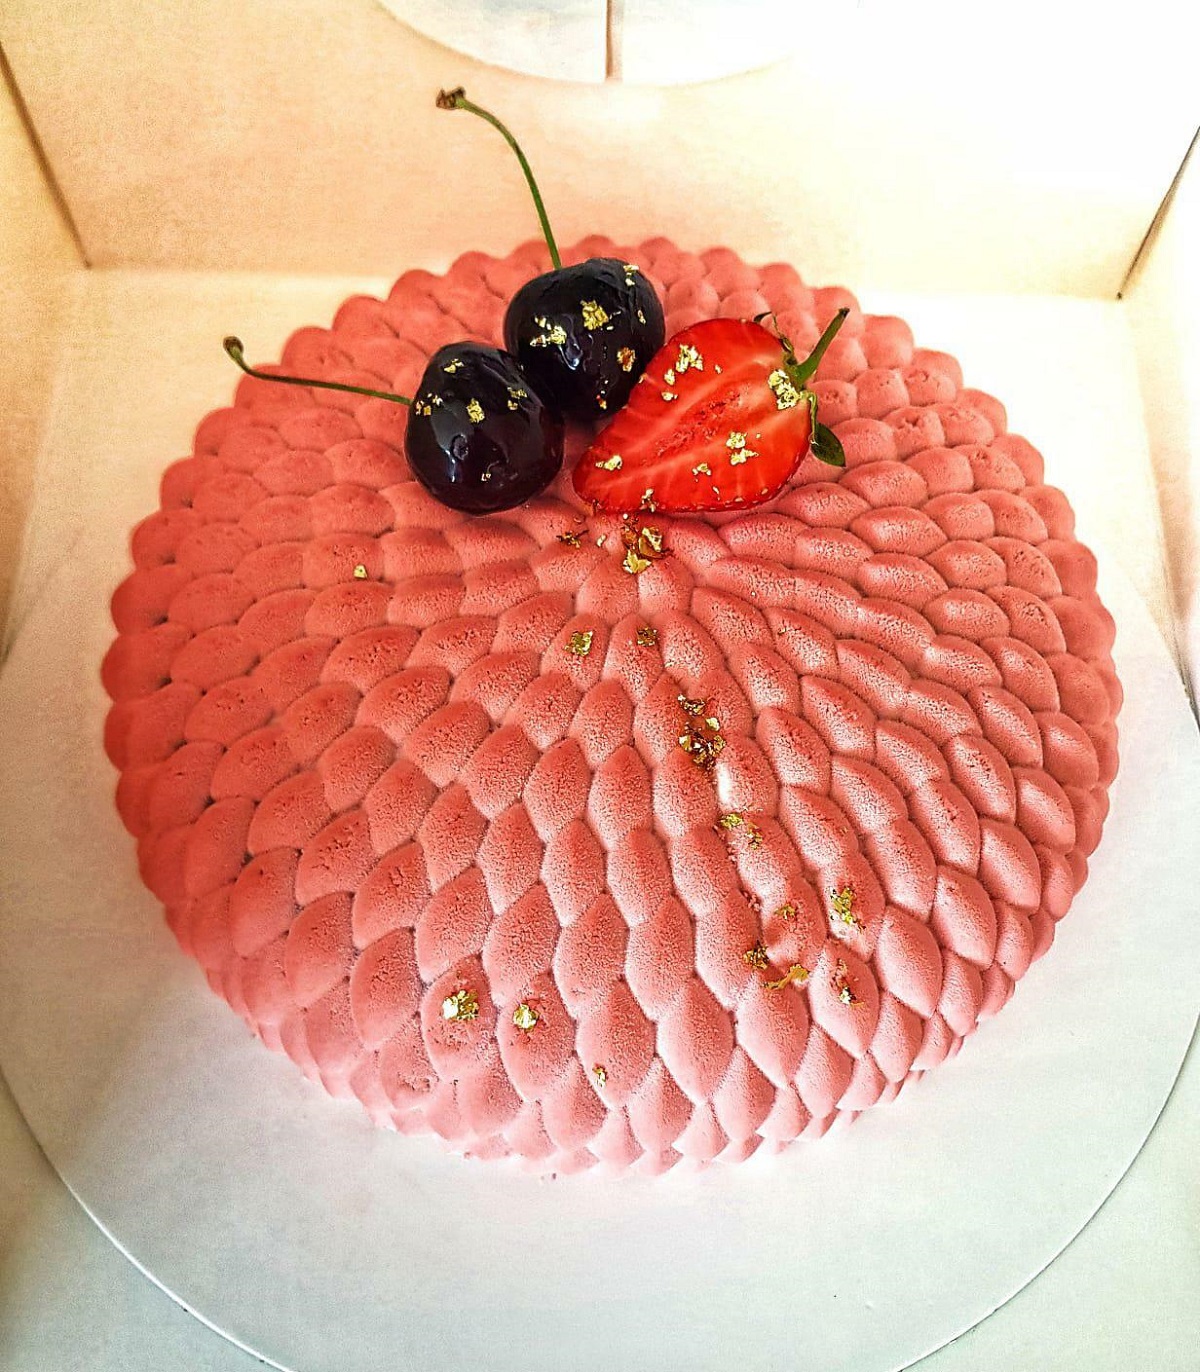 Here's A Strawberry And Cherry Mixed Cake! What Do You think, Guys?